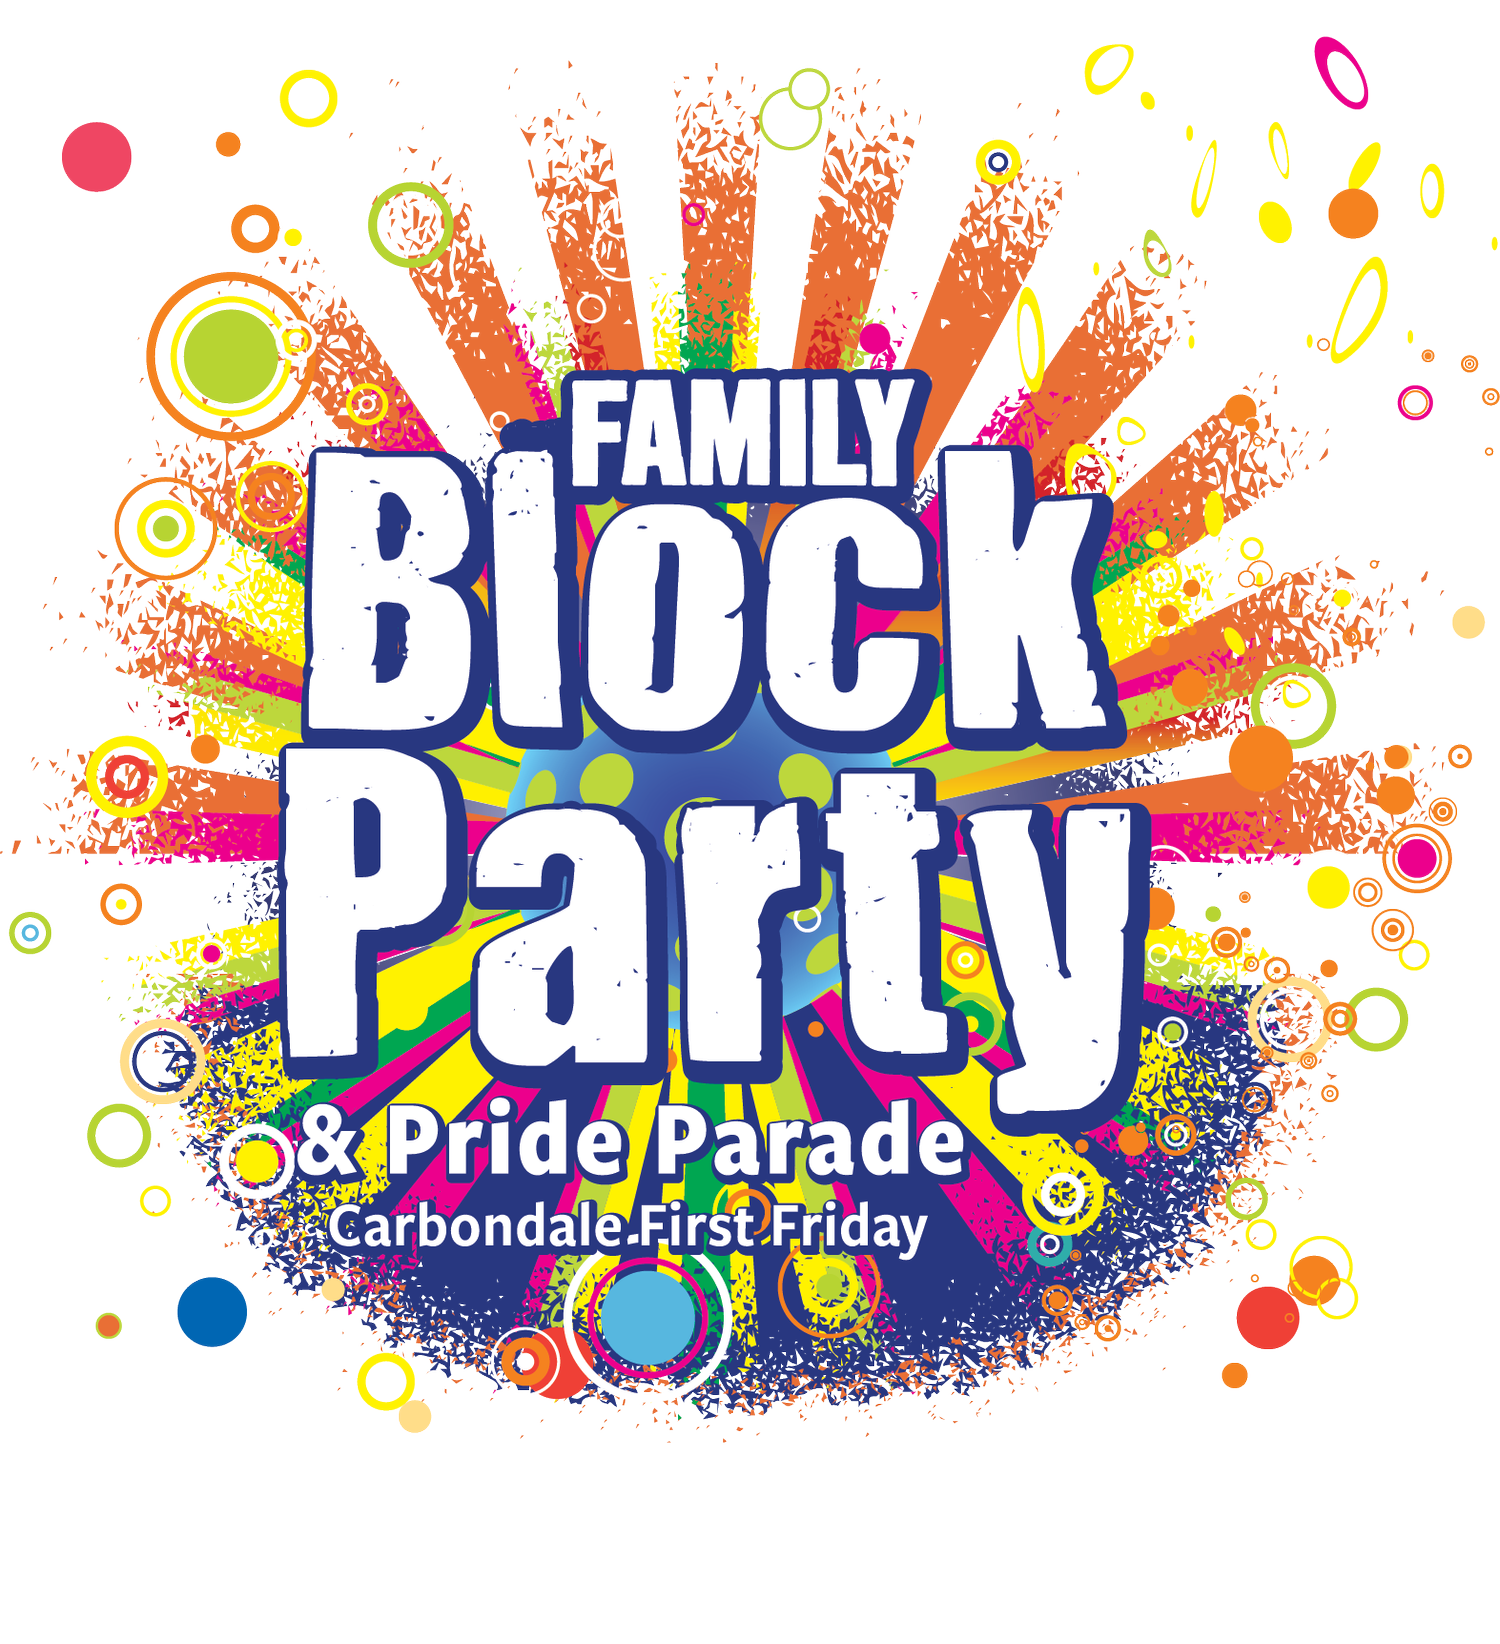 Carbondale Family Block Party